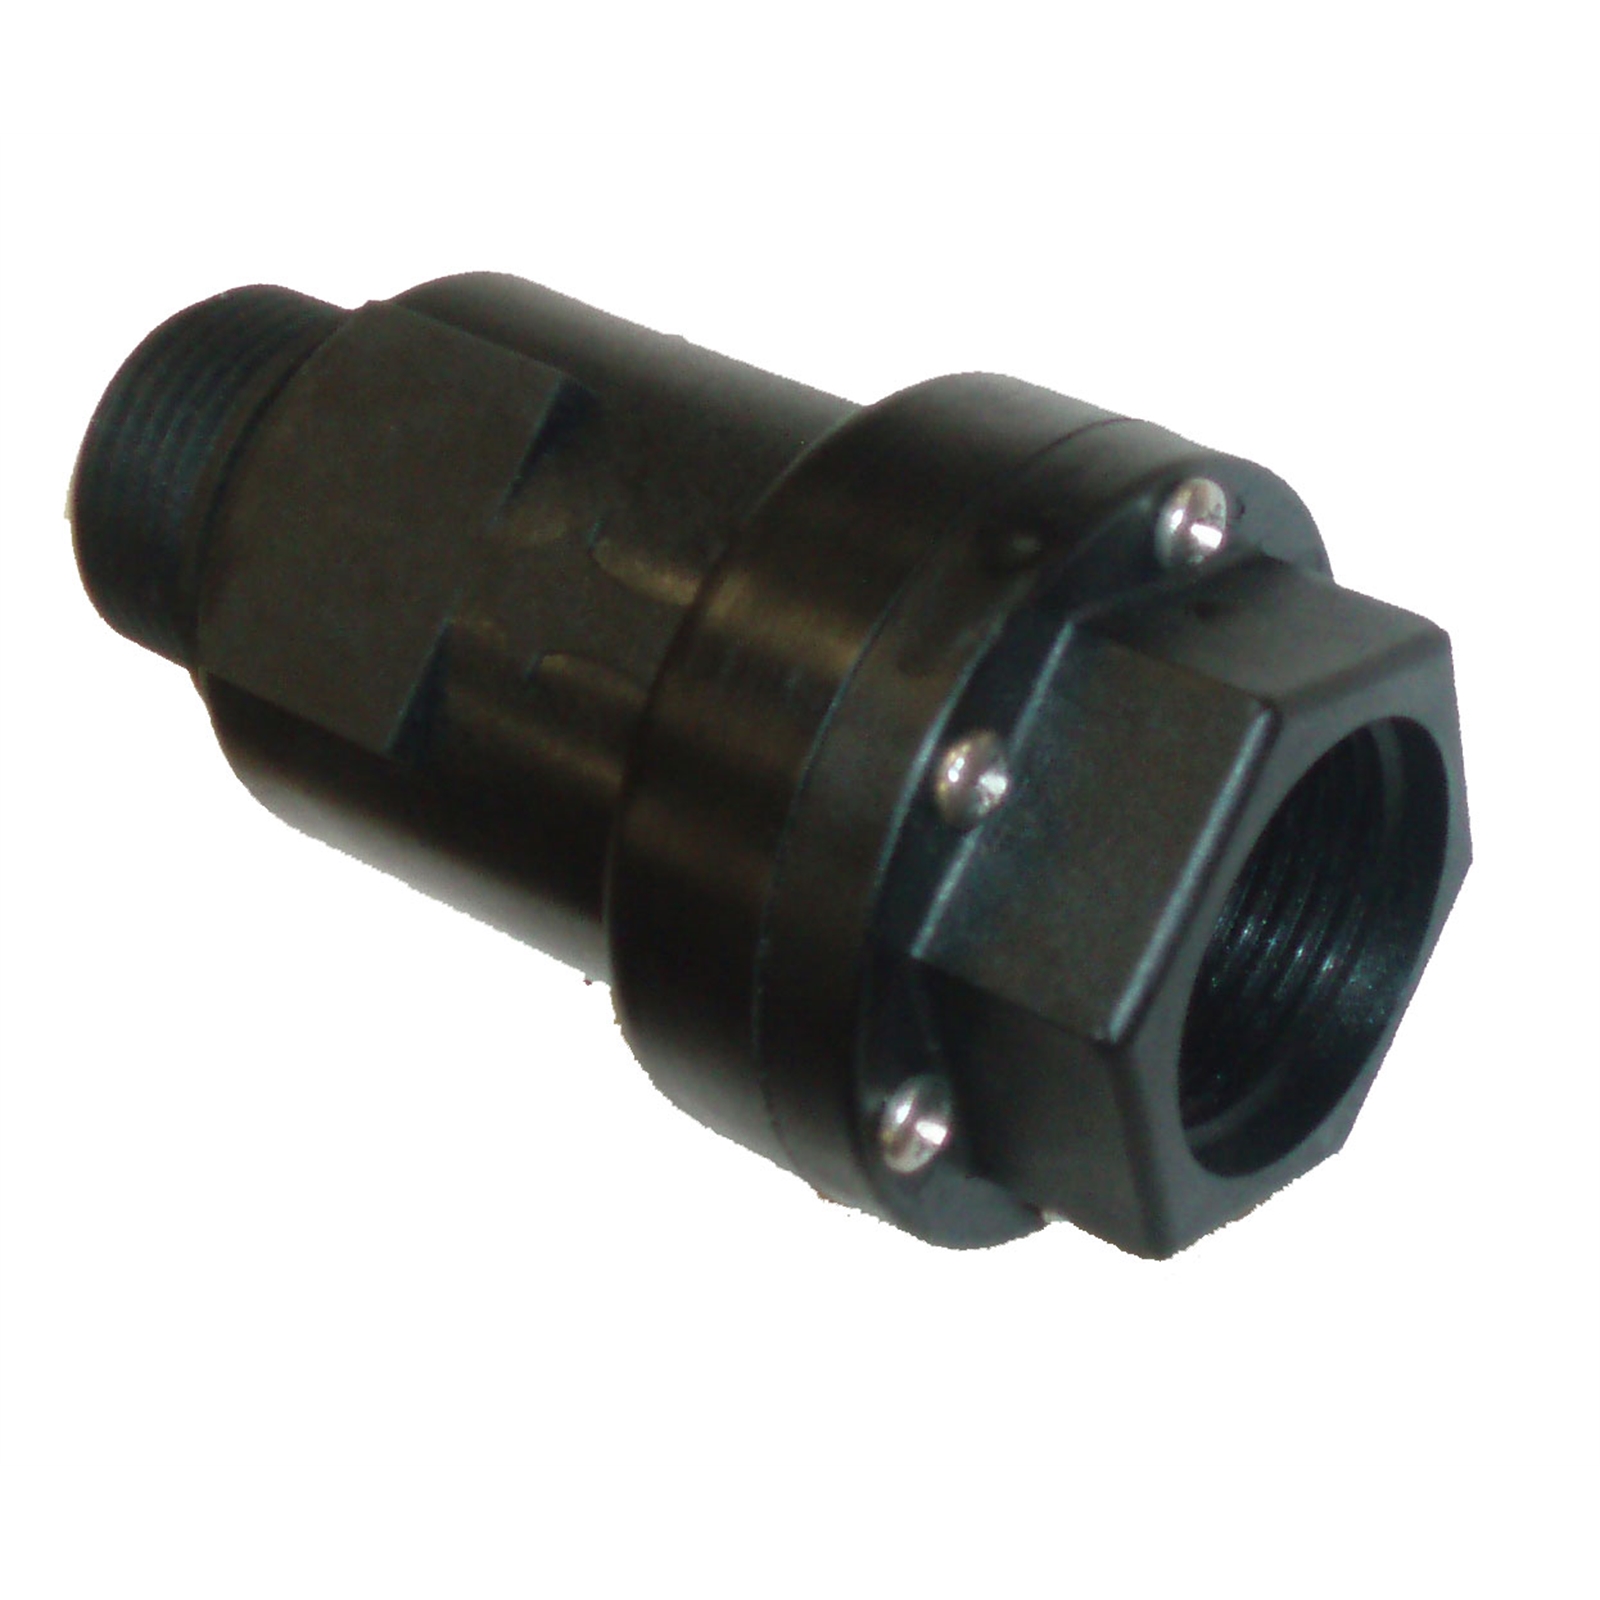 IRRITROL 20MM PLASTIC DUAL CHECK FOR BACKFLOW PREVENTION DEVICES